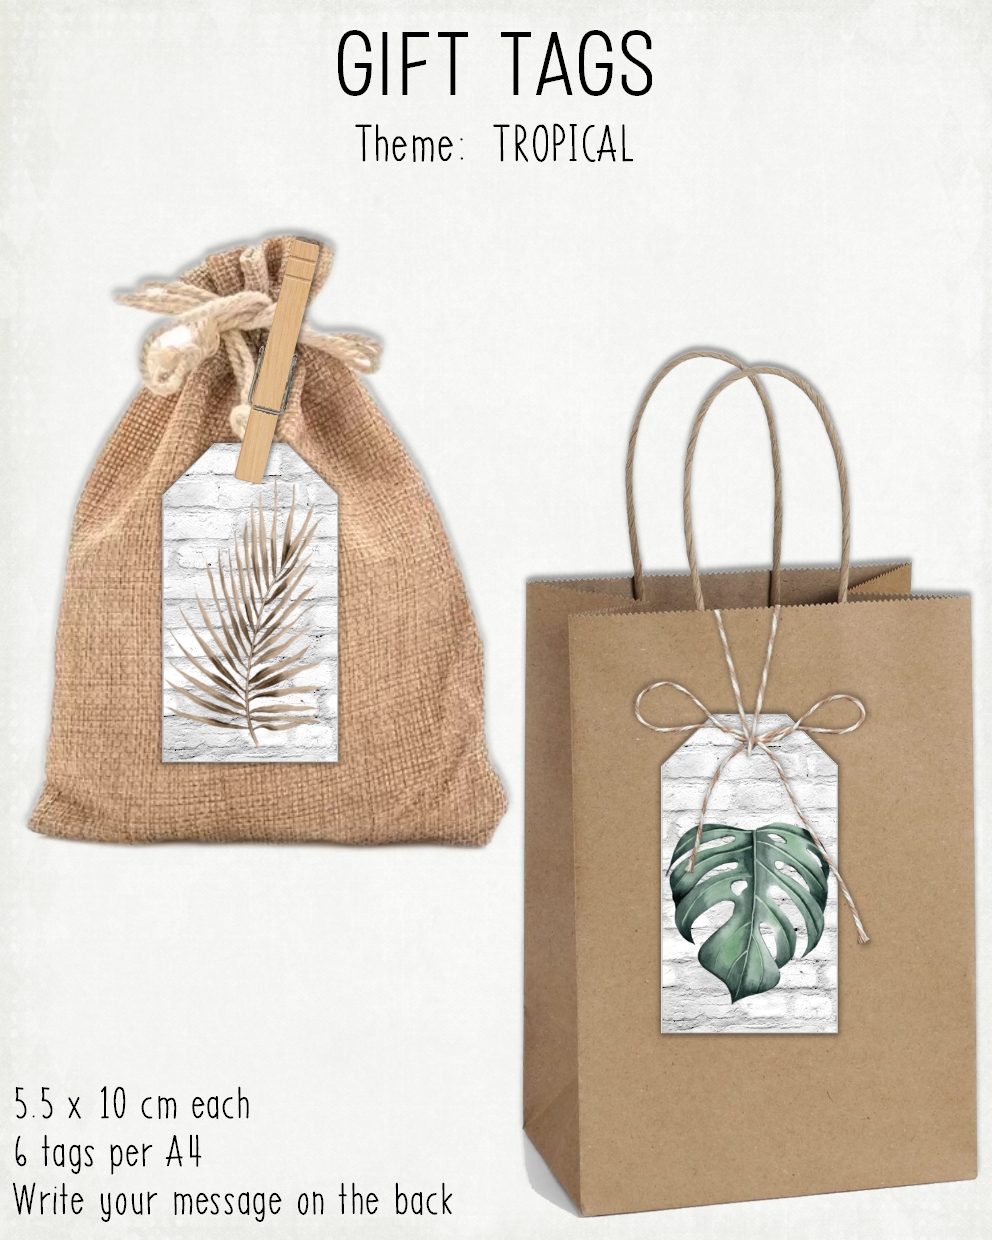 READY TO PRINT:  Gift Tags - Tropical